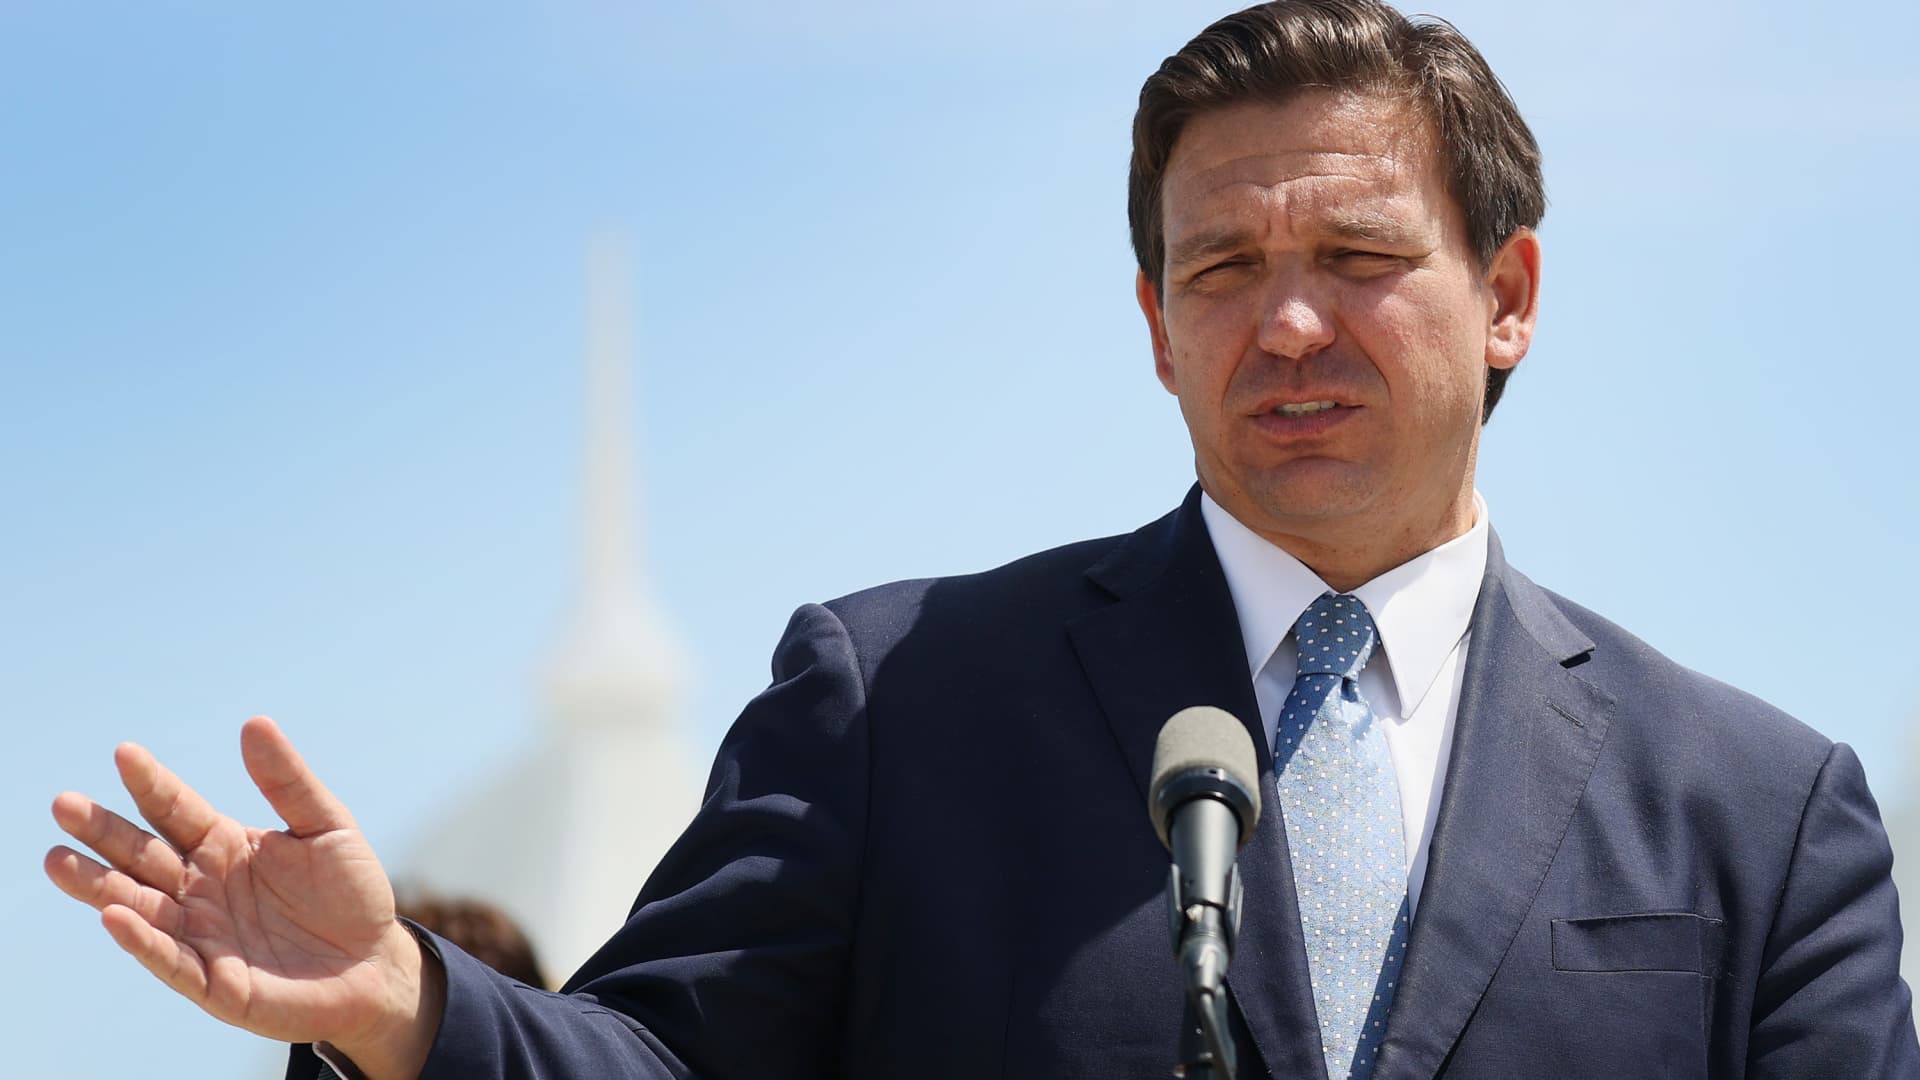 Florida Gov. Ron DeSantis speaks to the media about the cruise industry during a press conference at PortMiami on April 08, 2021 in Miami, Florida.